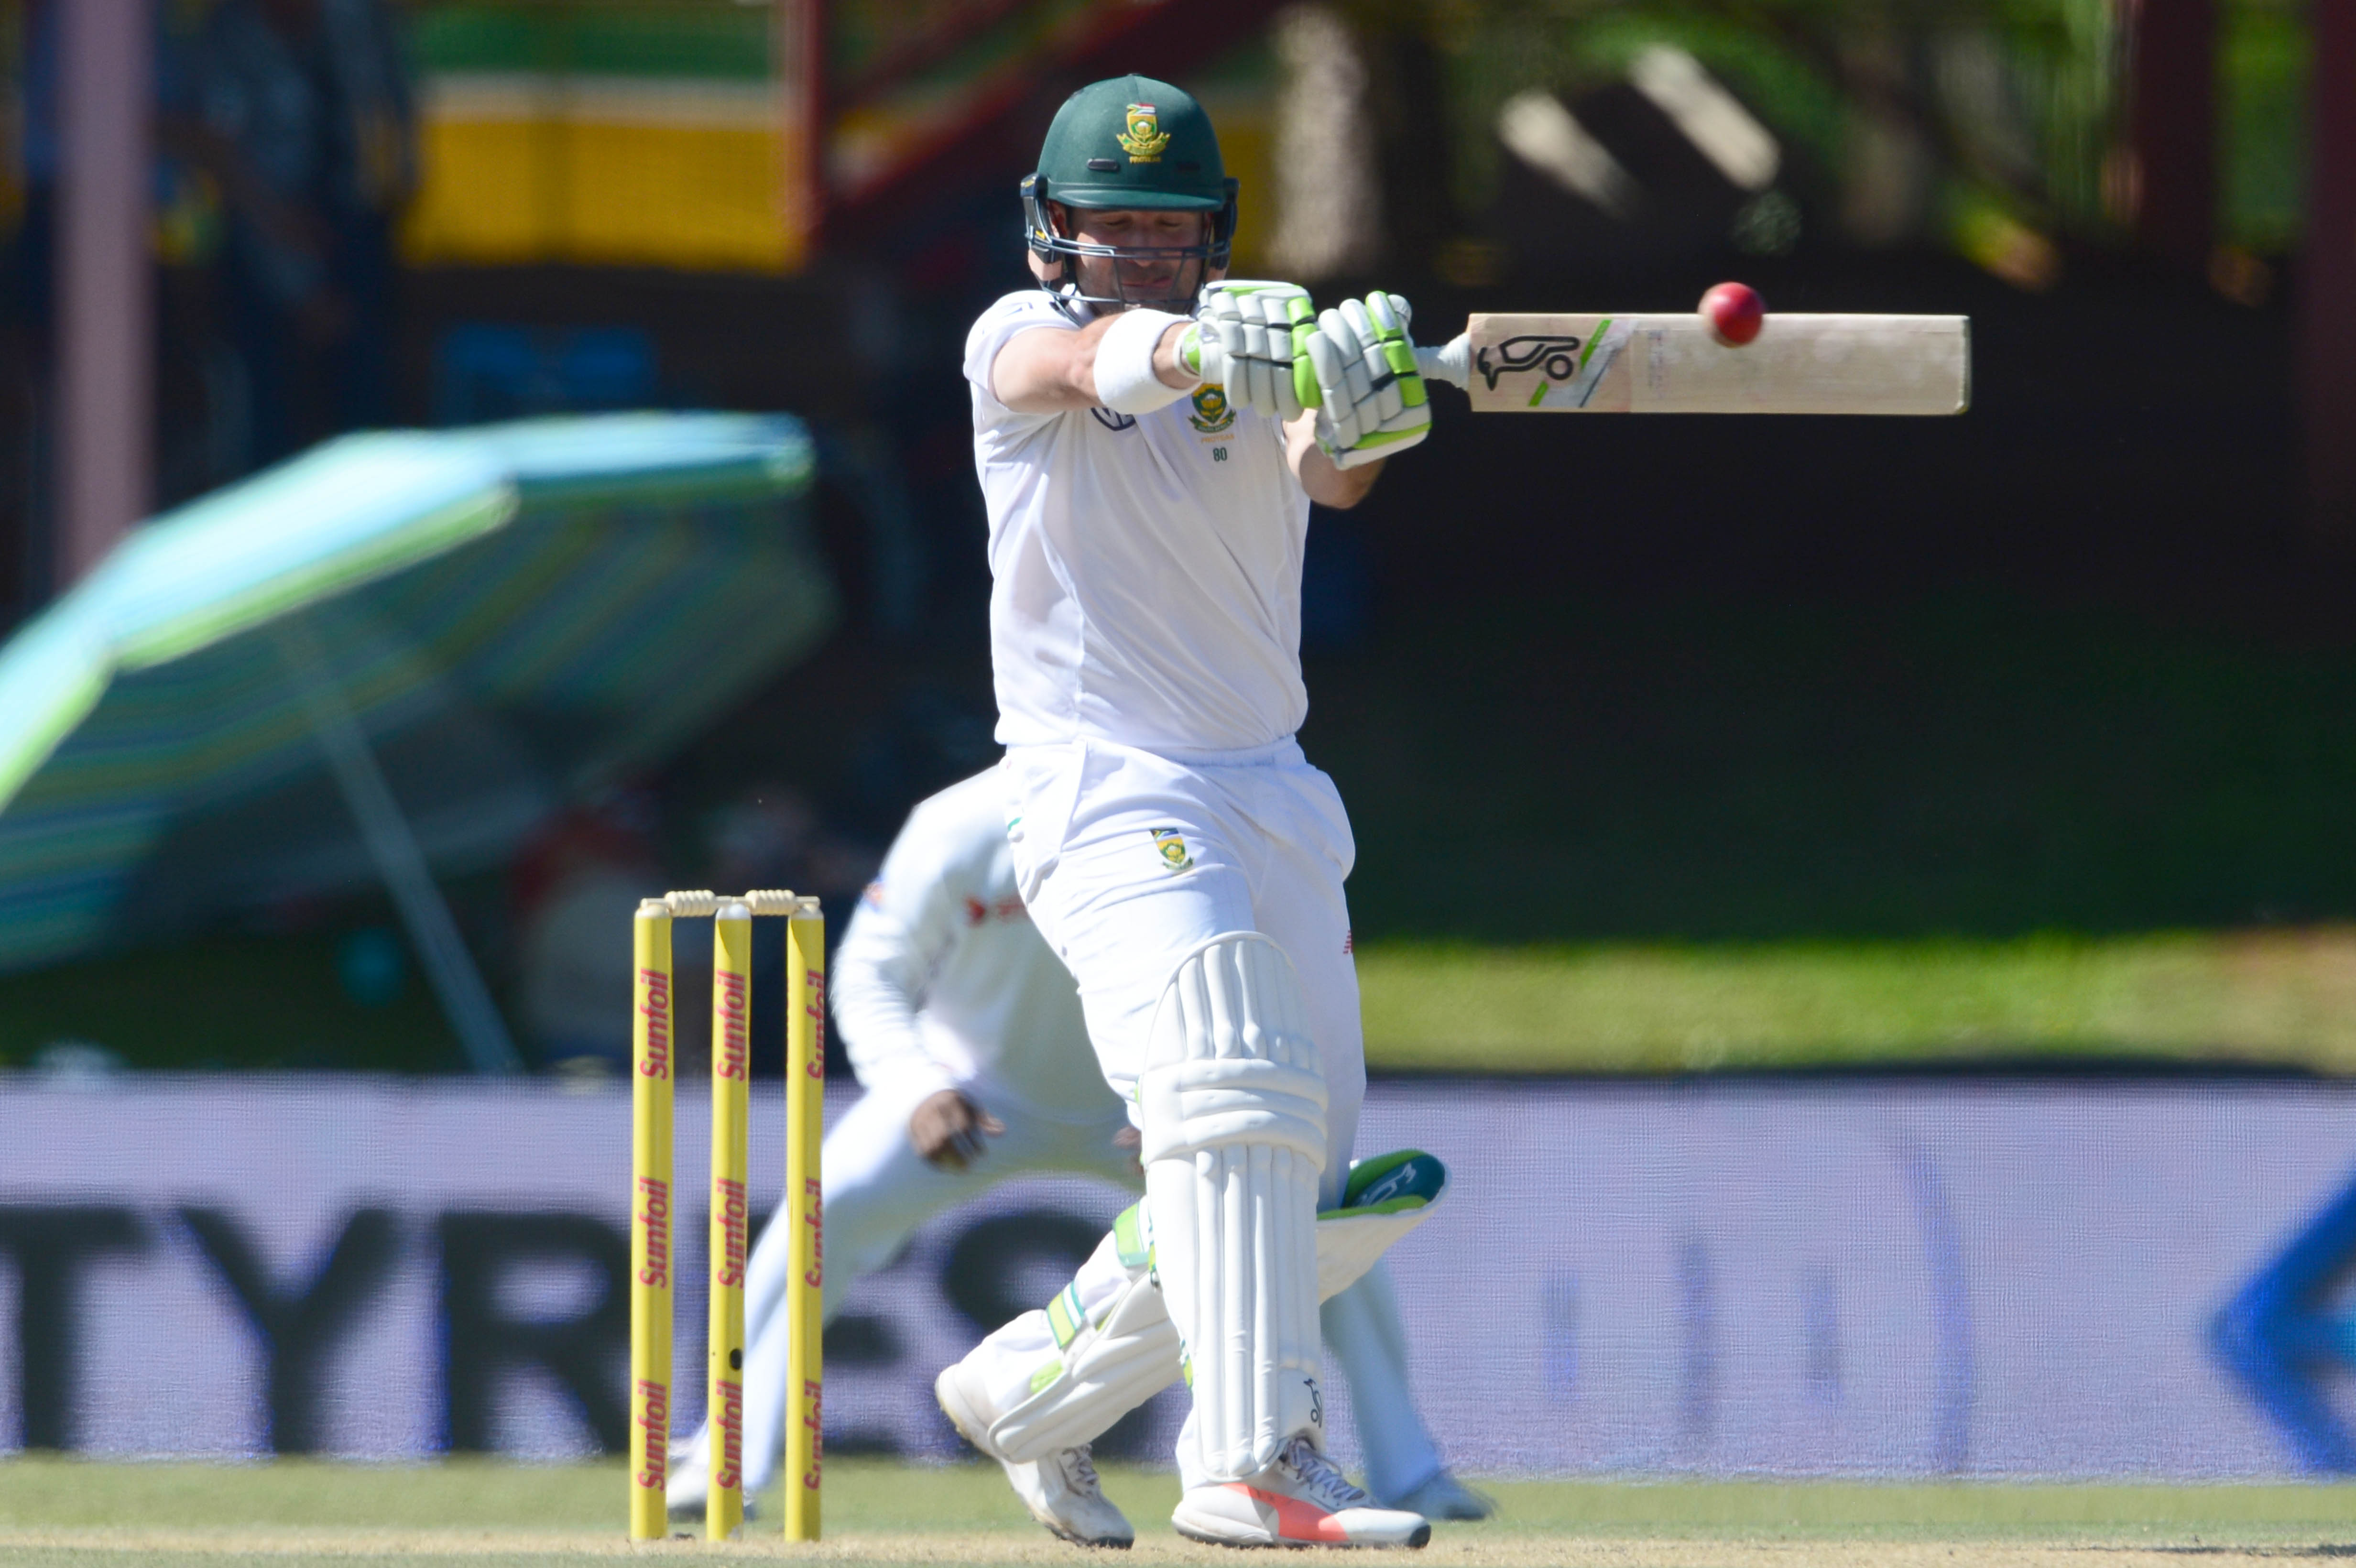 SA vs IND | Dean Elgar outshines Rahul in century battle as South Africa seize control on Day 2